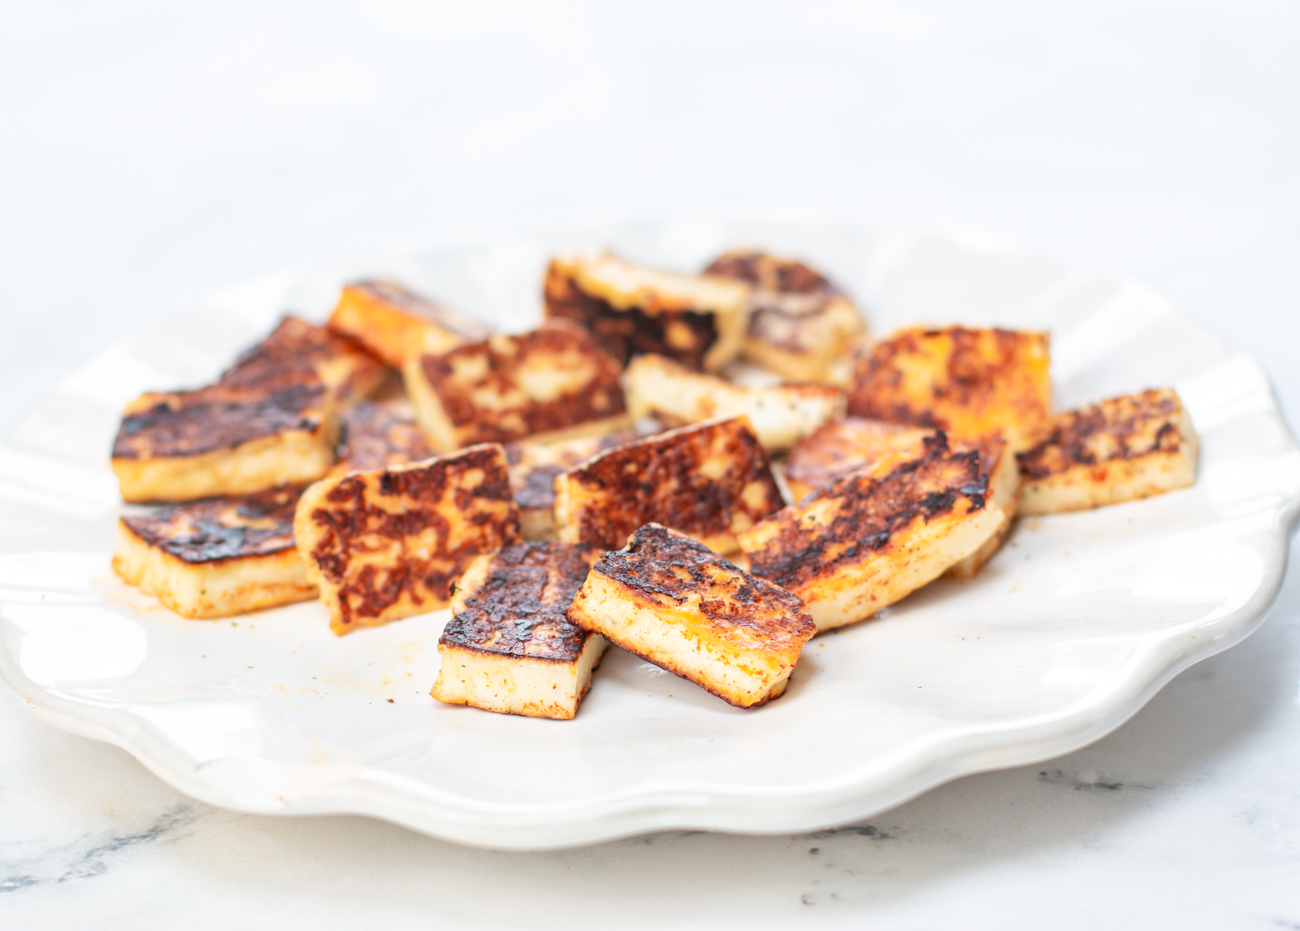 Seasoned and Grilled Halloumi Cheese 